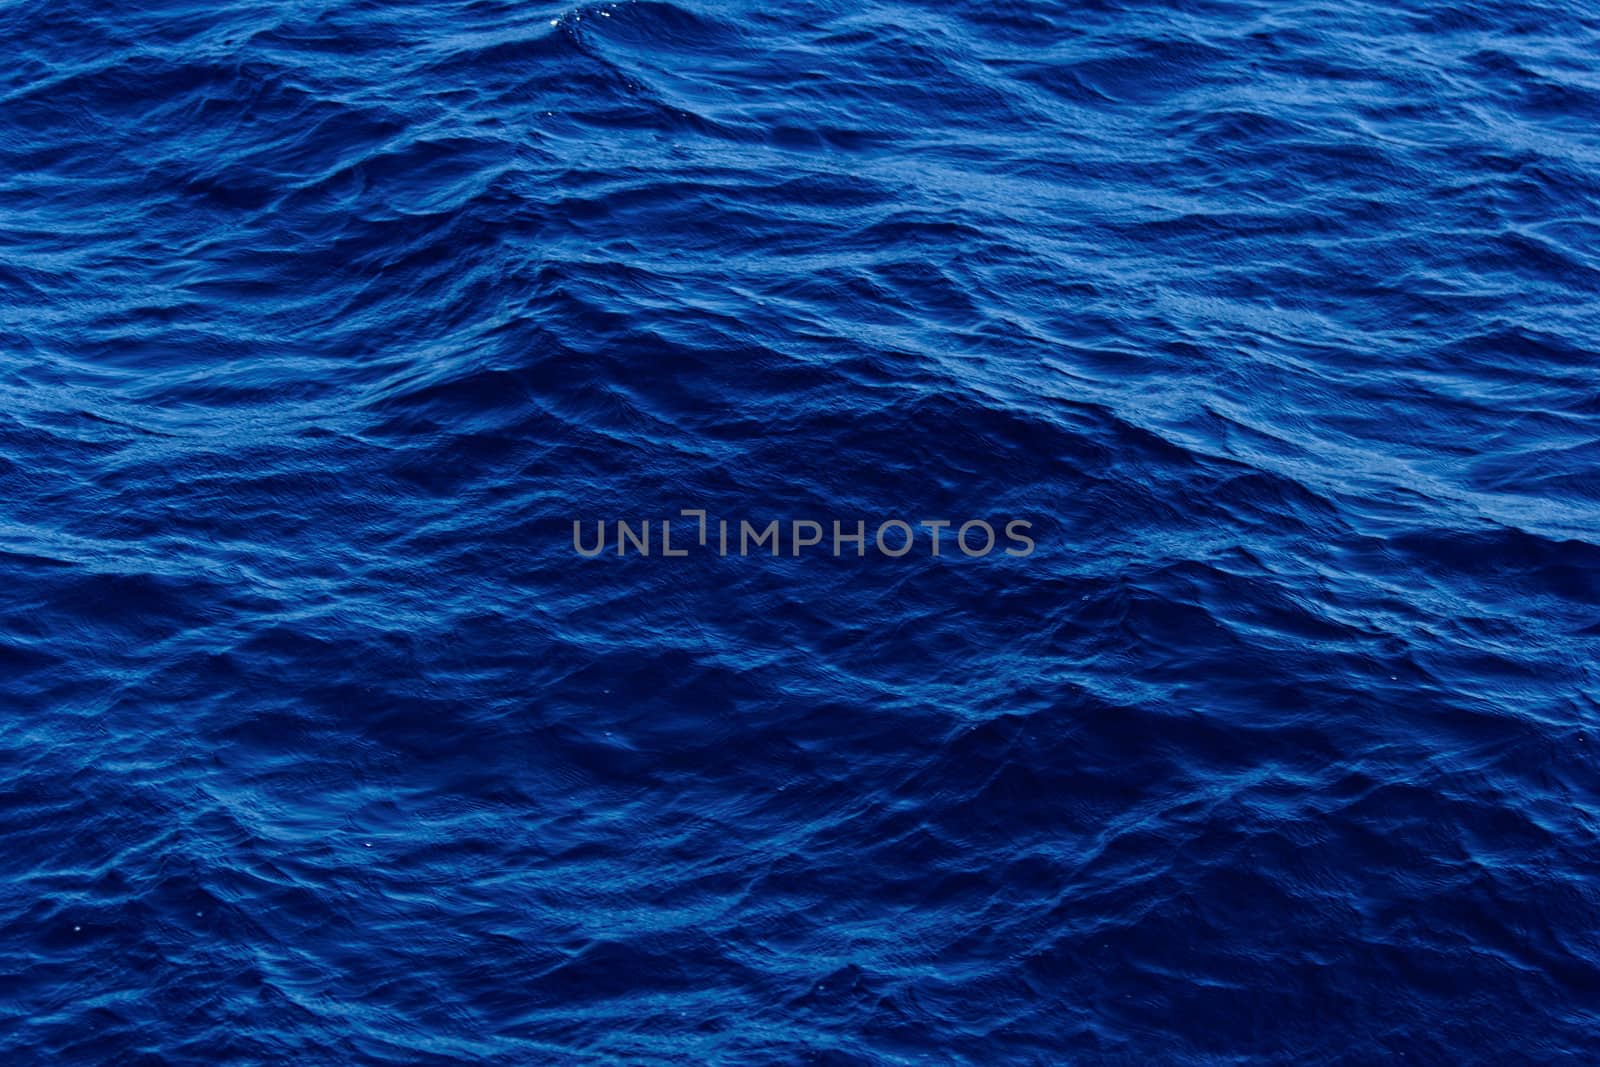 blue abstract background of wavy water surface by NagyDodo